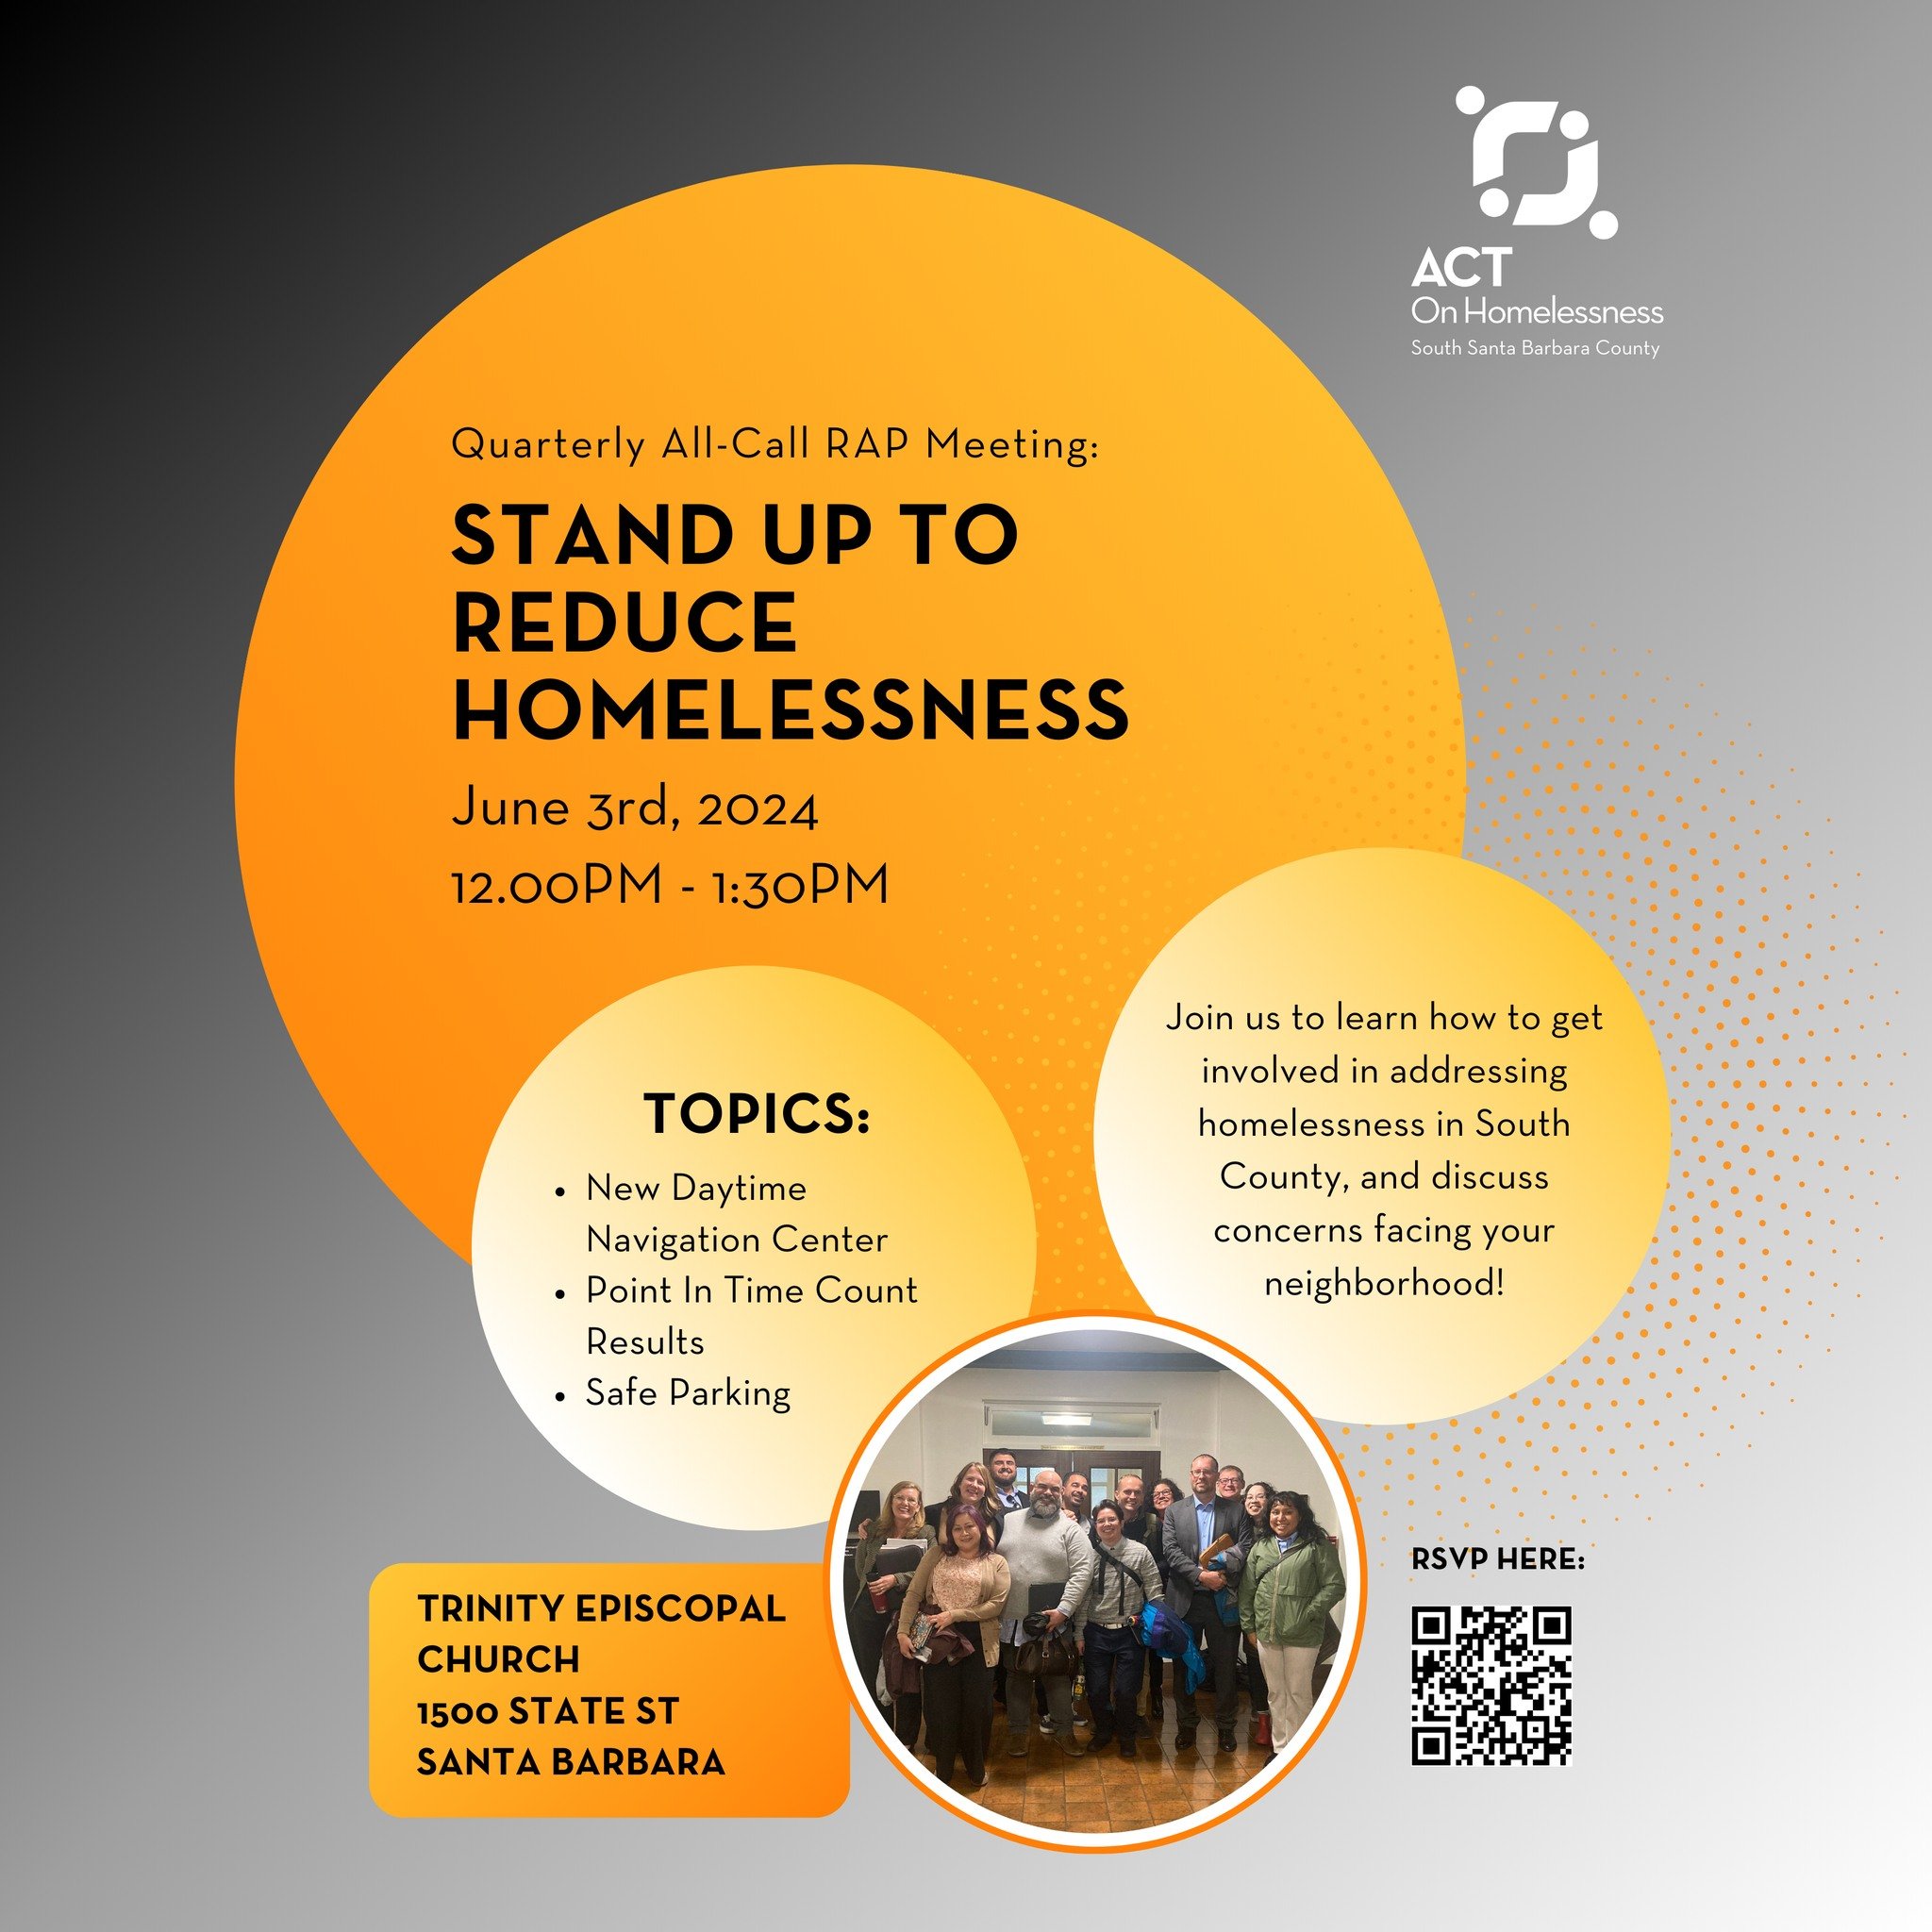 There are some IMPORTANT updates to share related to homelessness in South Santa Barbara County, and a few new ways to get involved in local solutions. We invite you to join us on Monday, June 3 at 12pm at Trinity Episcopal Church (1500 State Street,